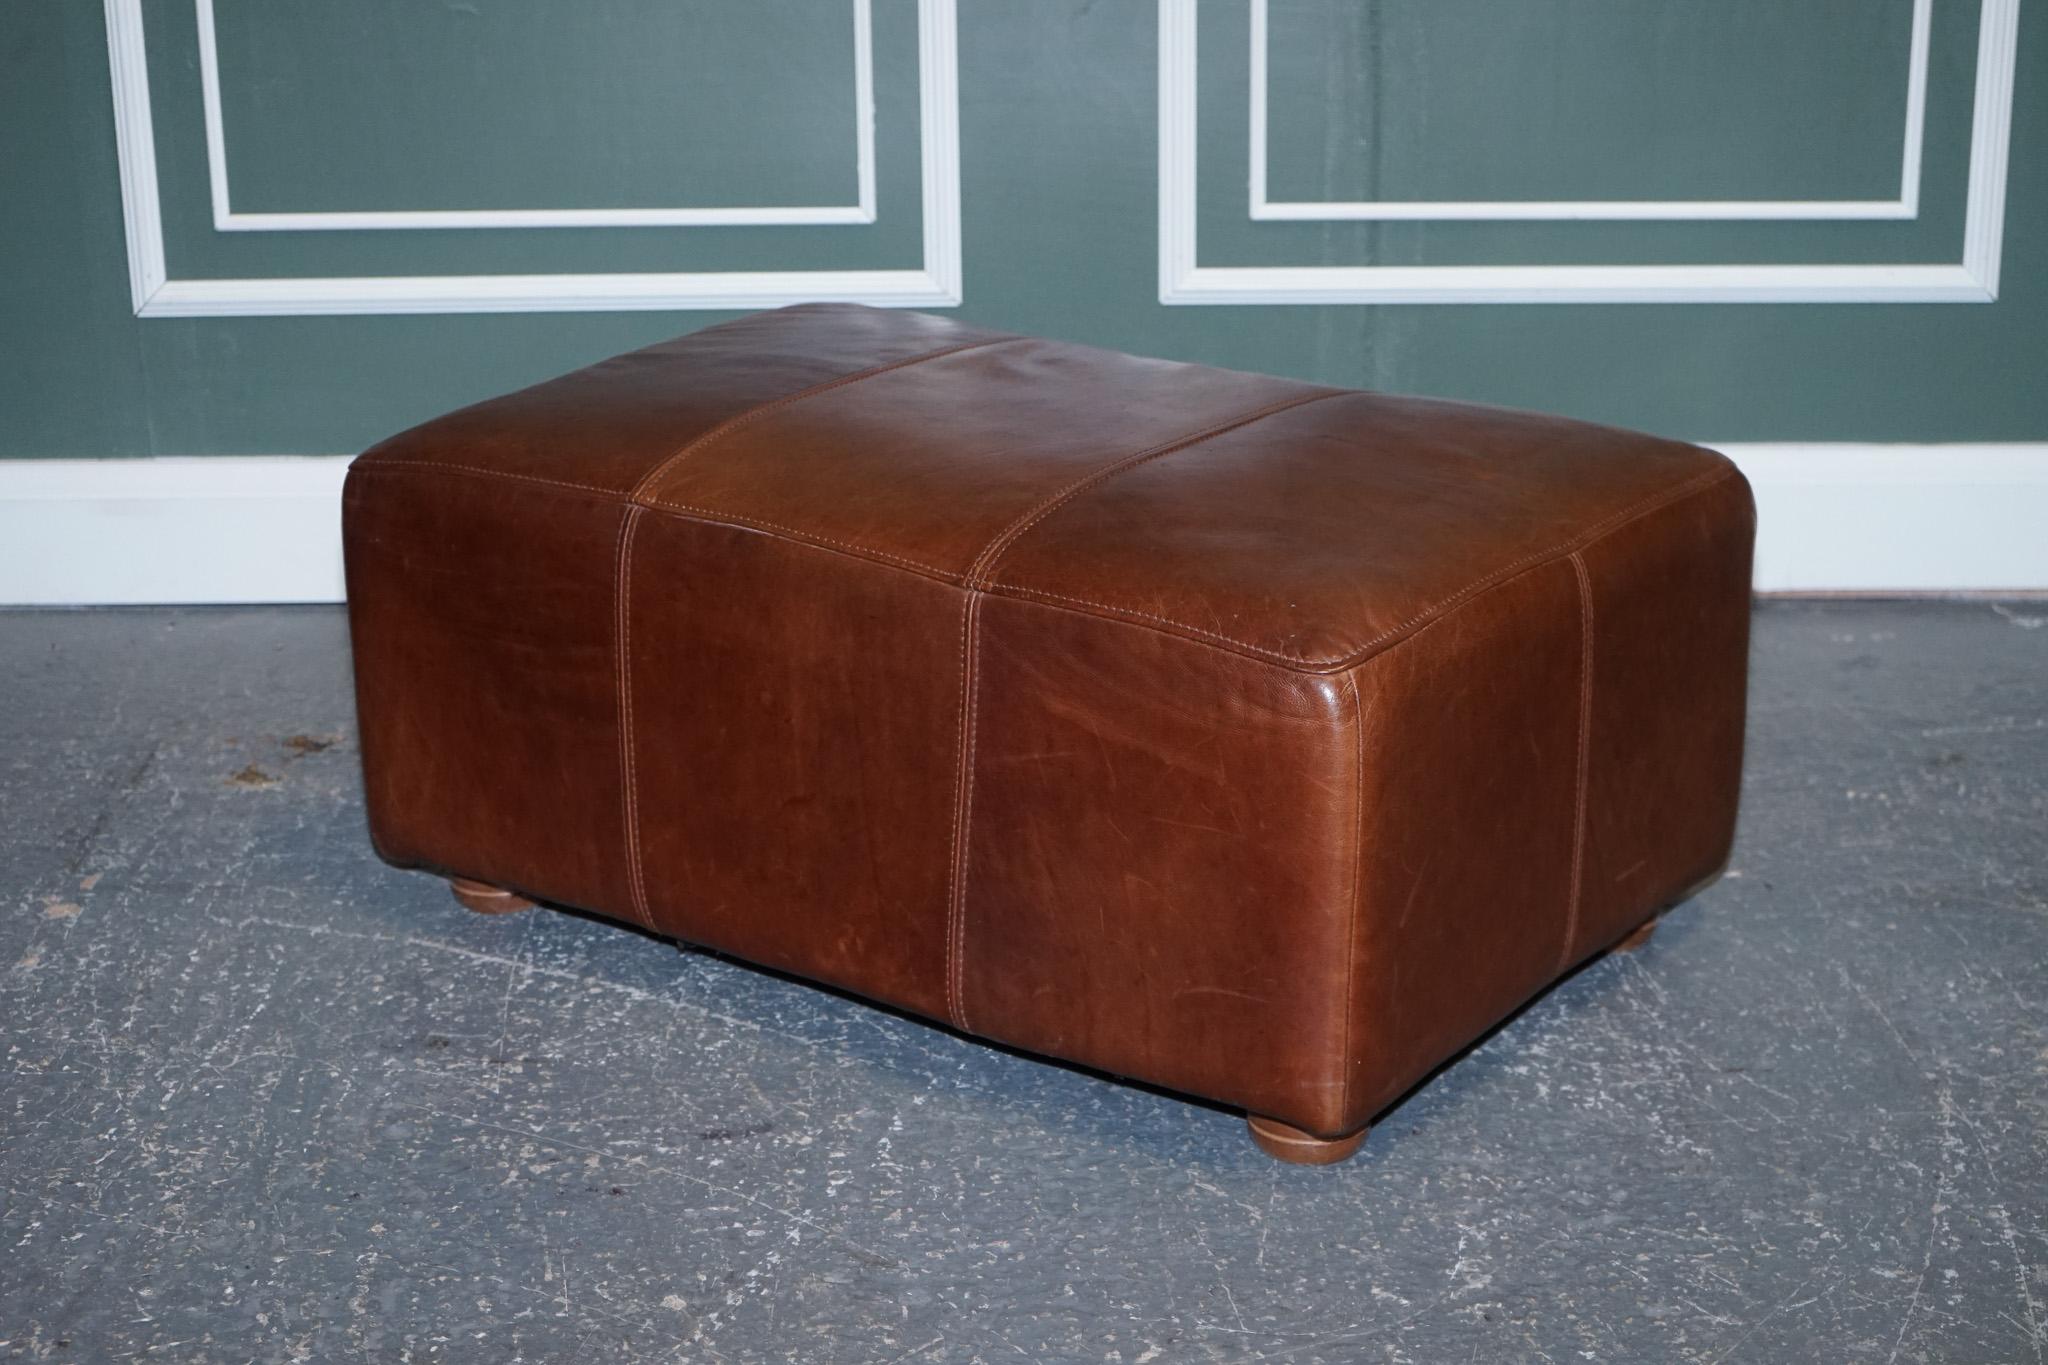 20th Century Large Vintage Brown Leather Footstool Ottoman Made by Halo